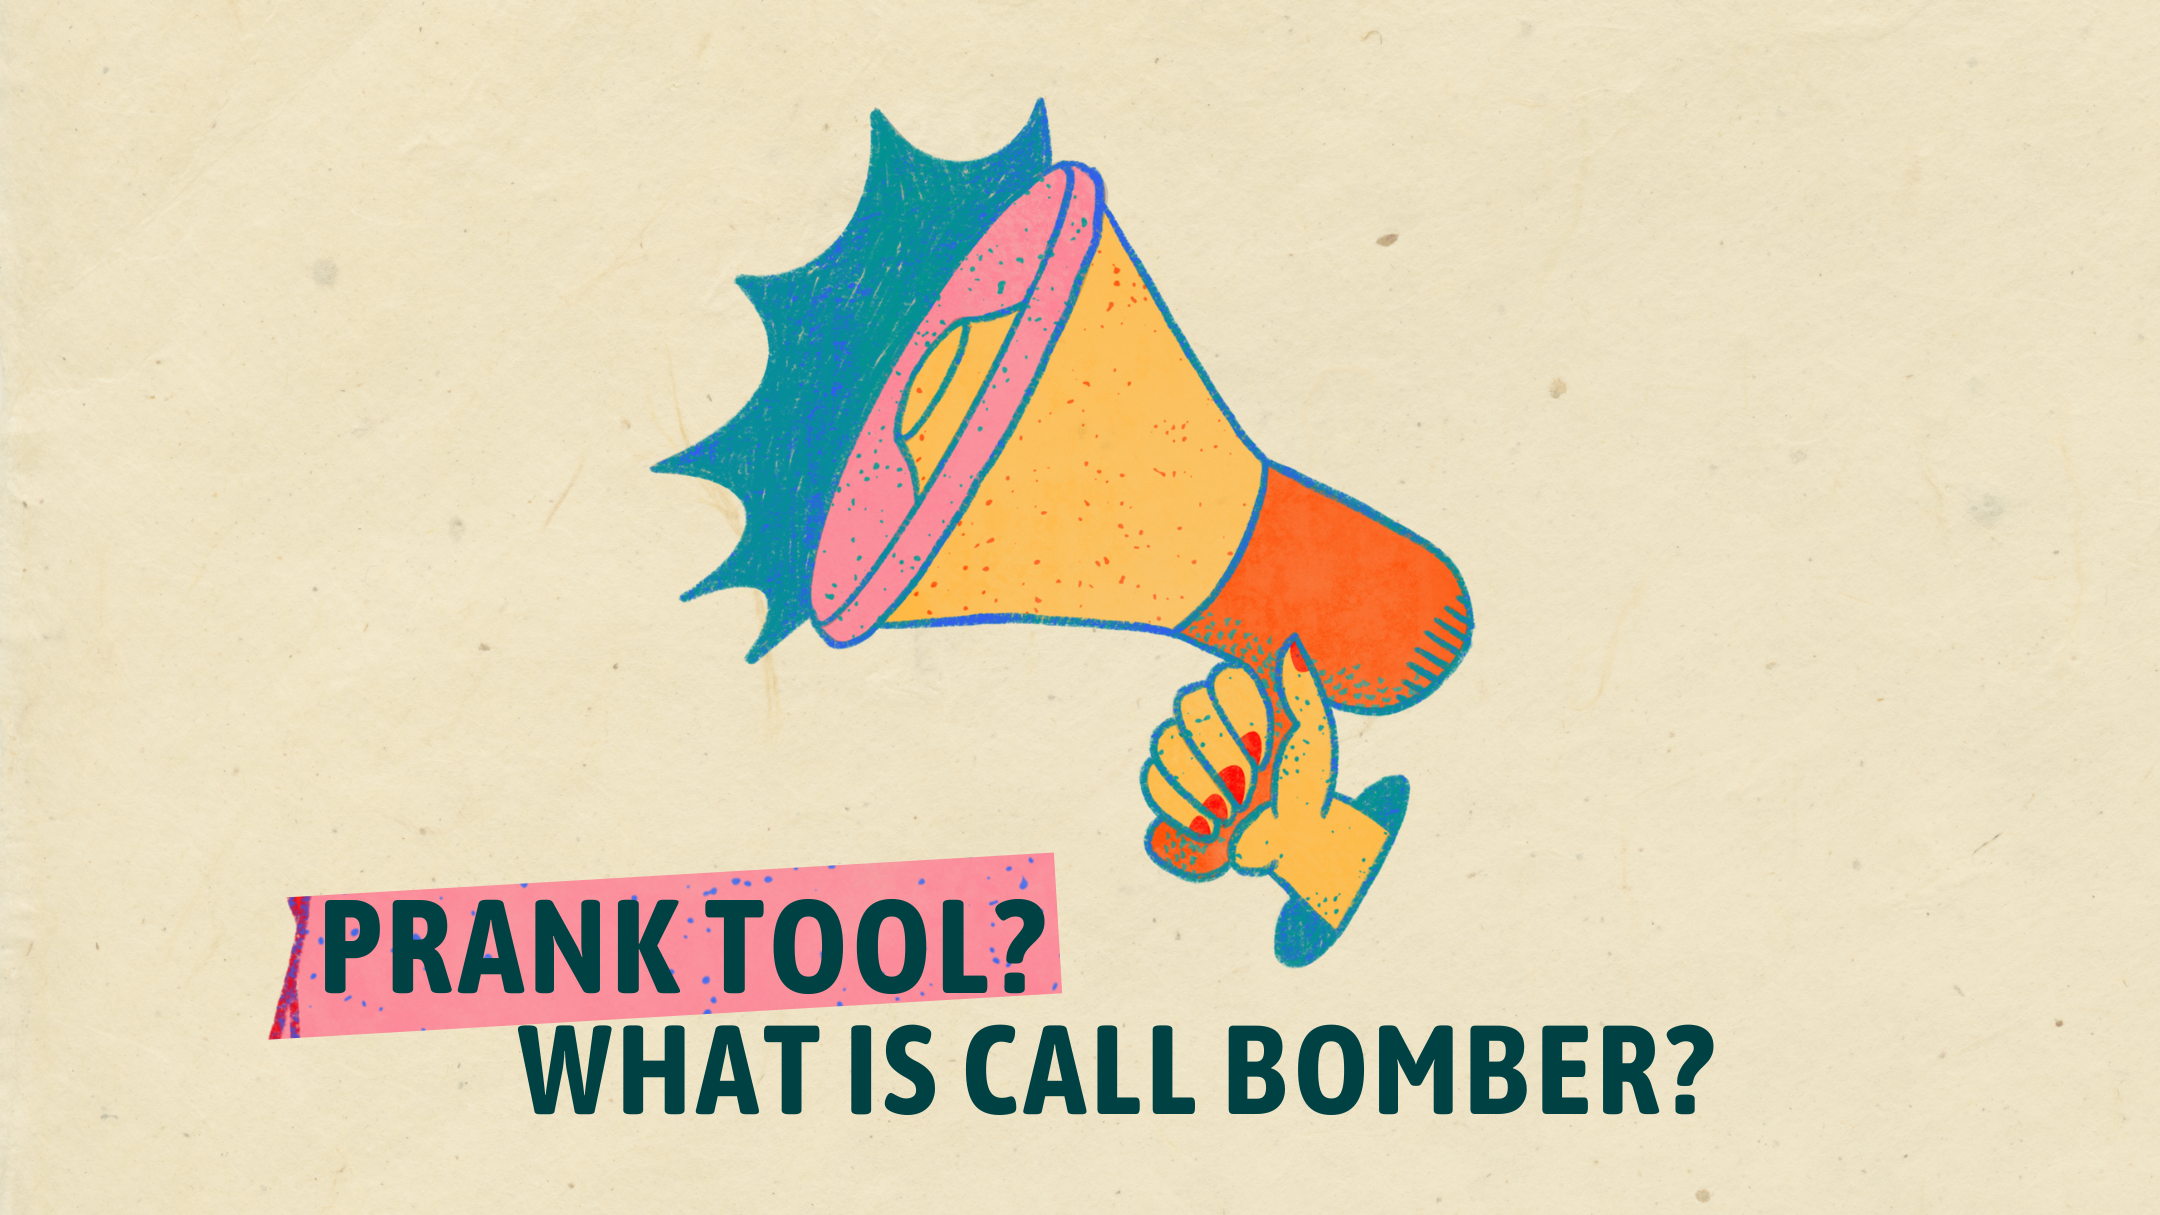 Call Bomber: What is Call Bomber - A Tool to Prank